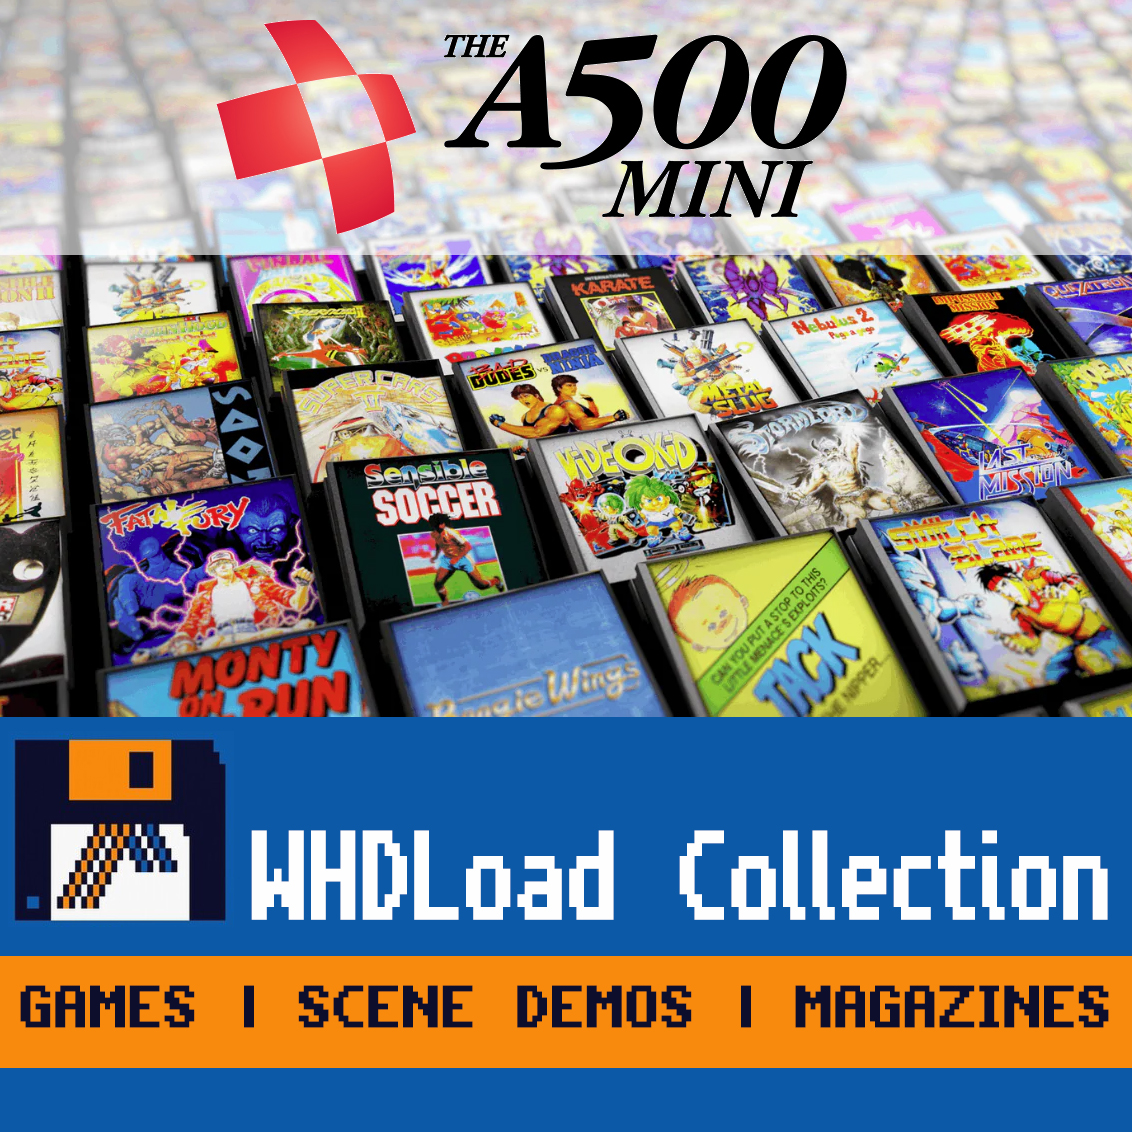 The A500 Mini Whdload Library